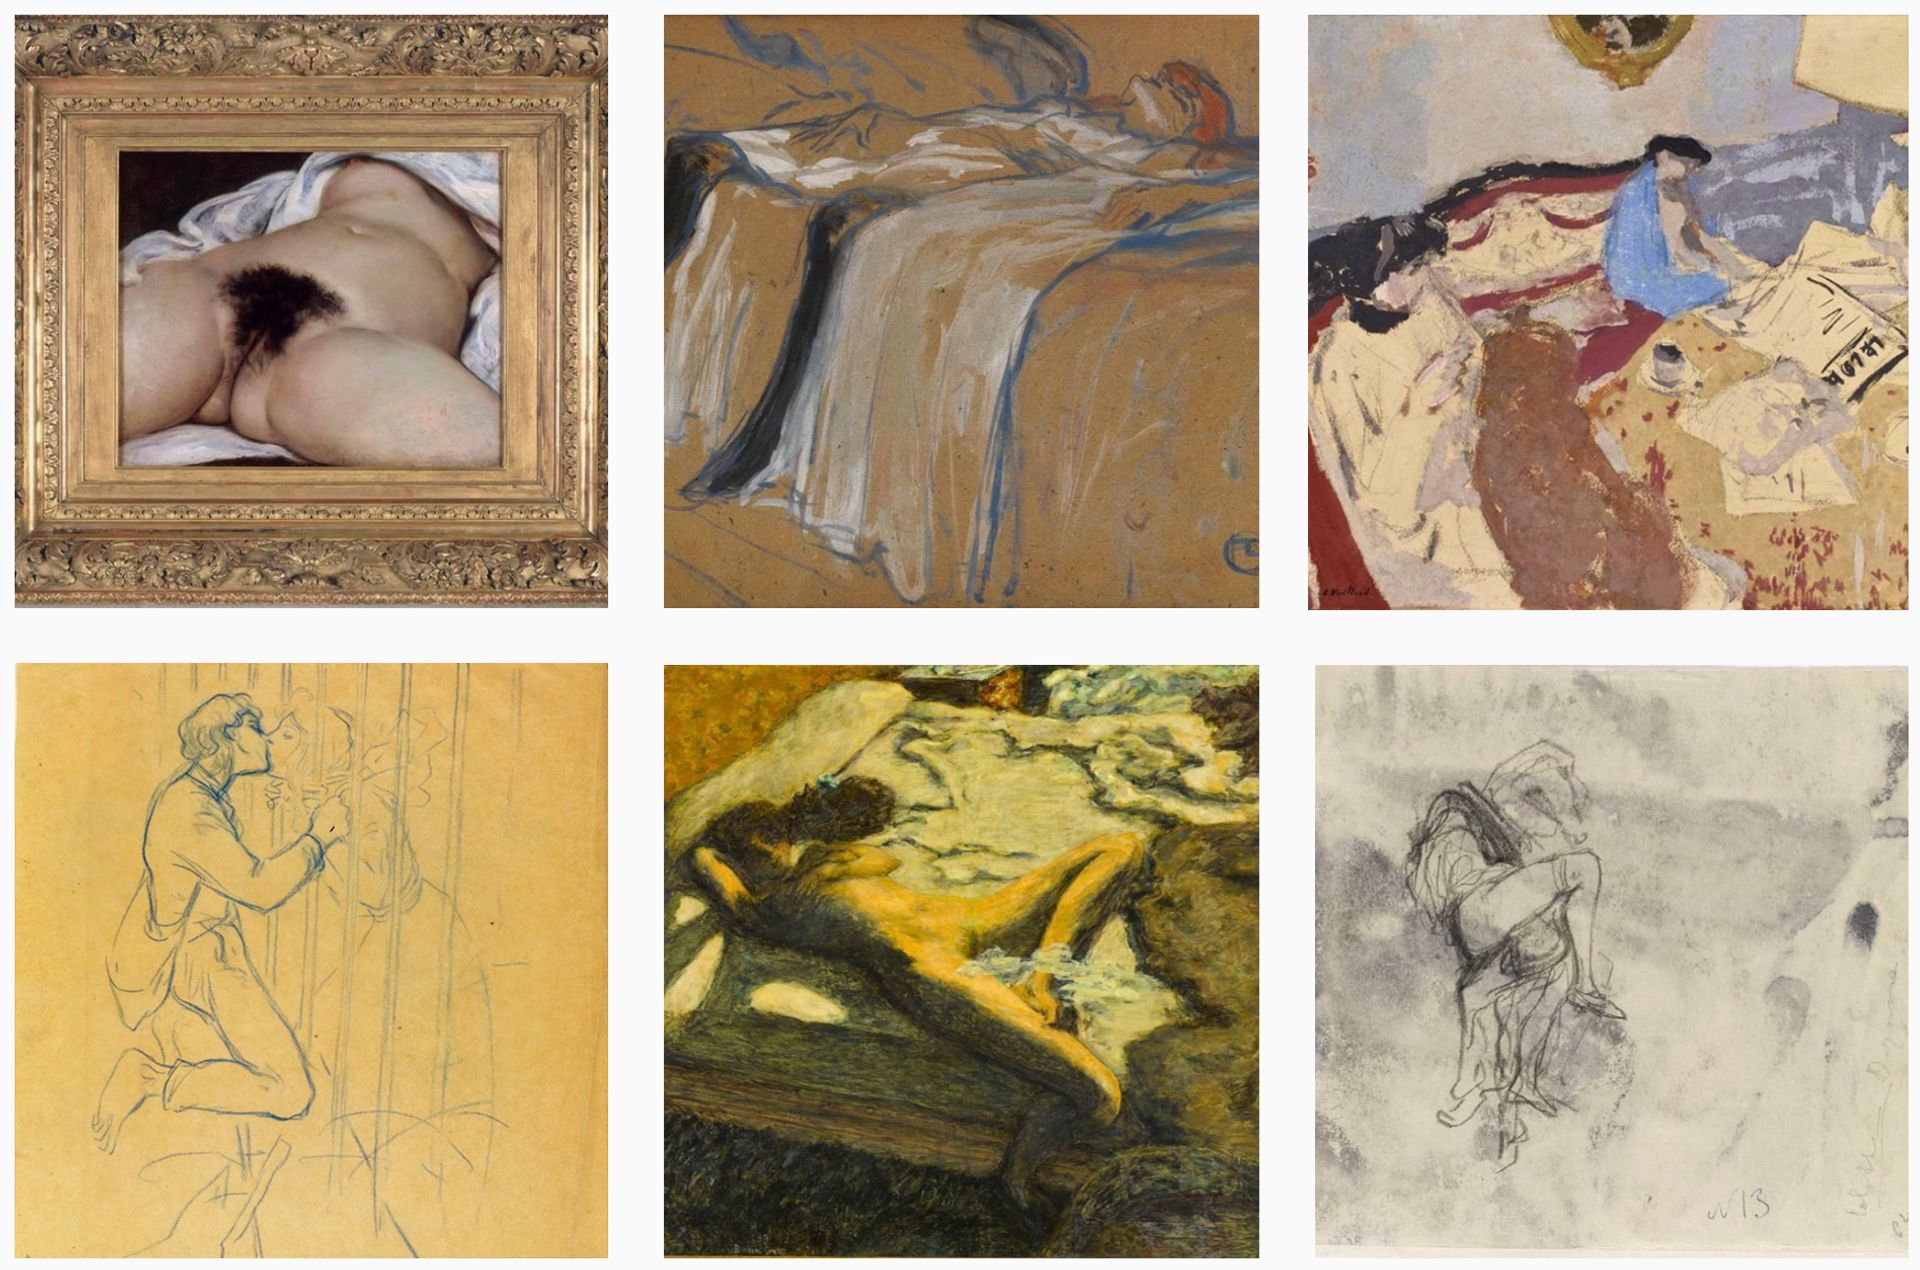 Some of Tracey Emin's selections for the Musée d'Orsay's new Instagram project looking at artists' favourite works in their collection 